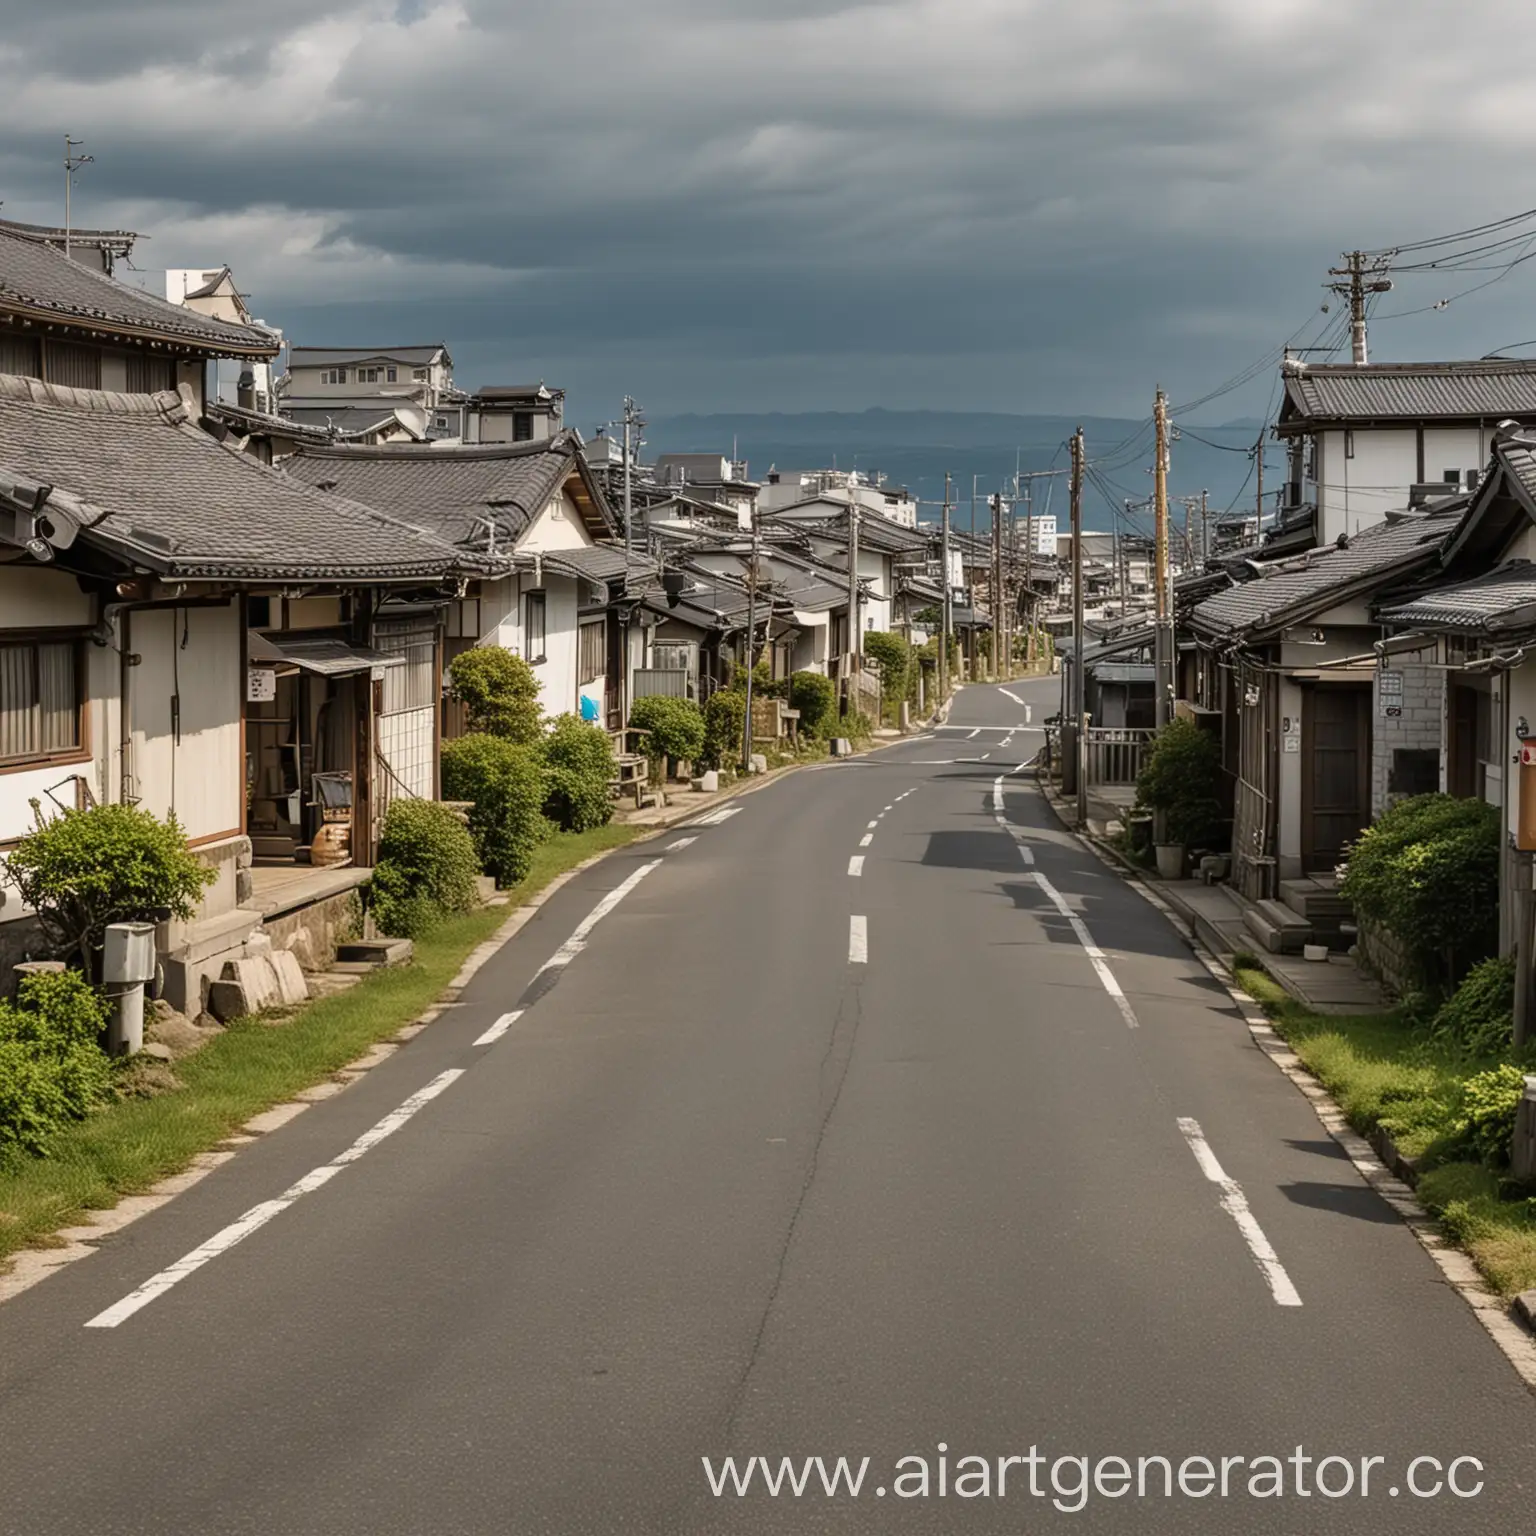 Scenic-Rural-Japanese-Crossroads-with-Coastal-Buildings